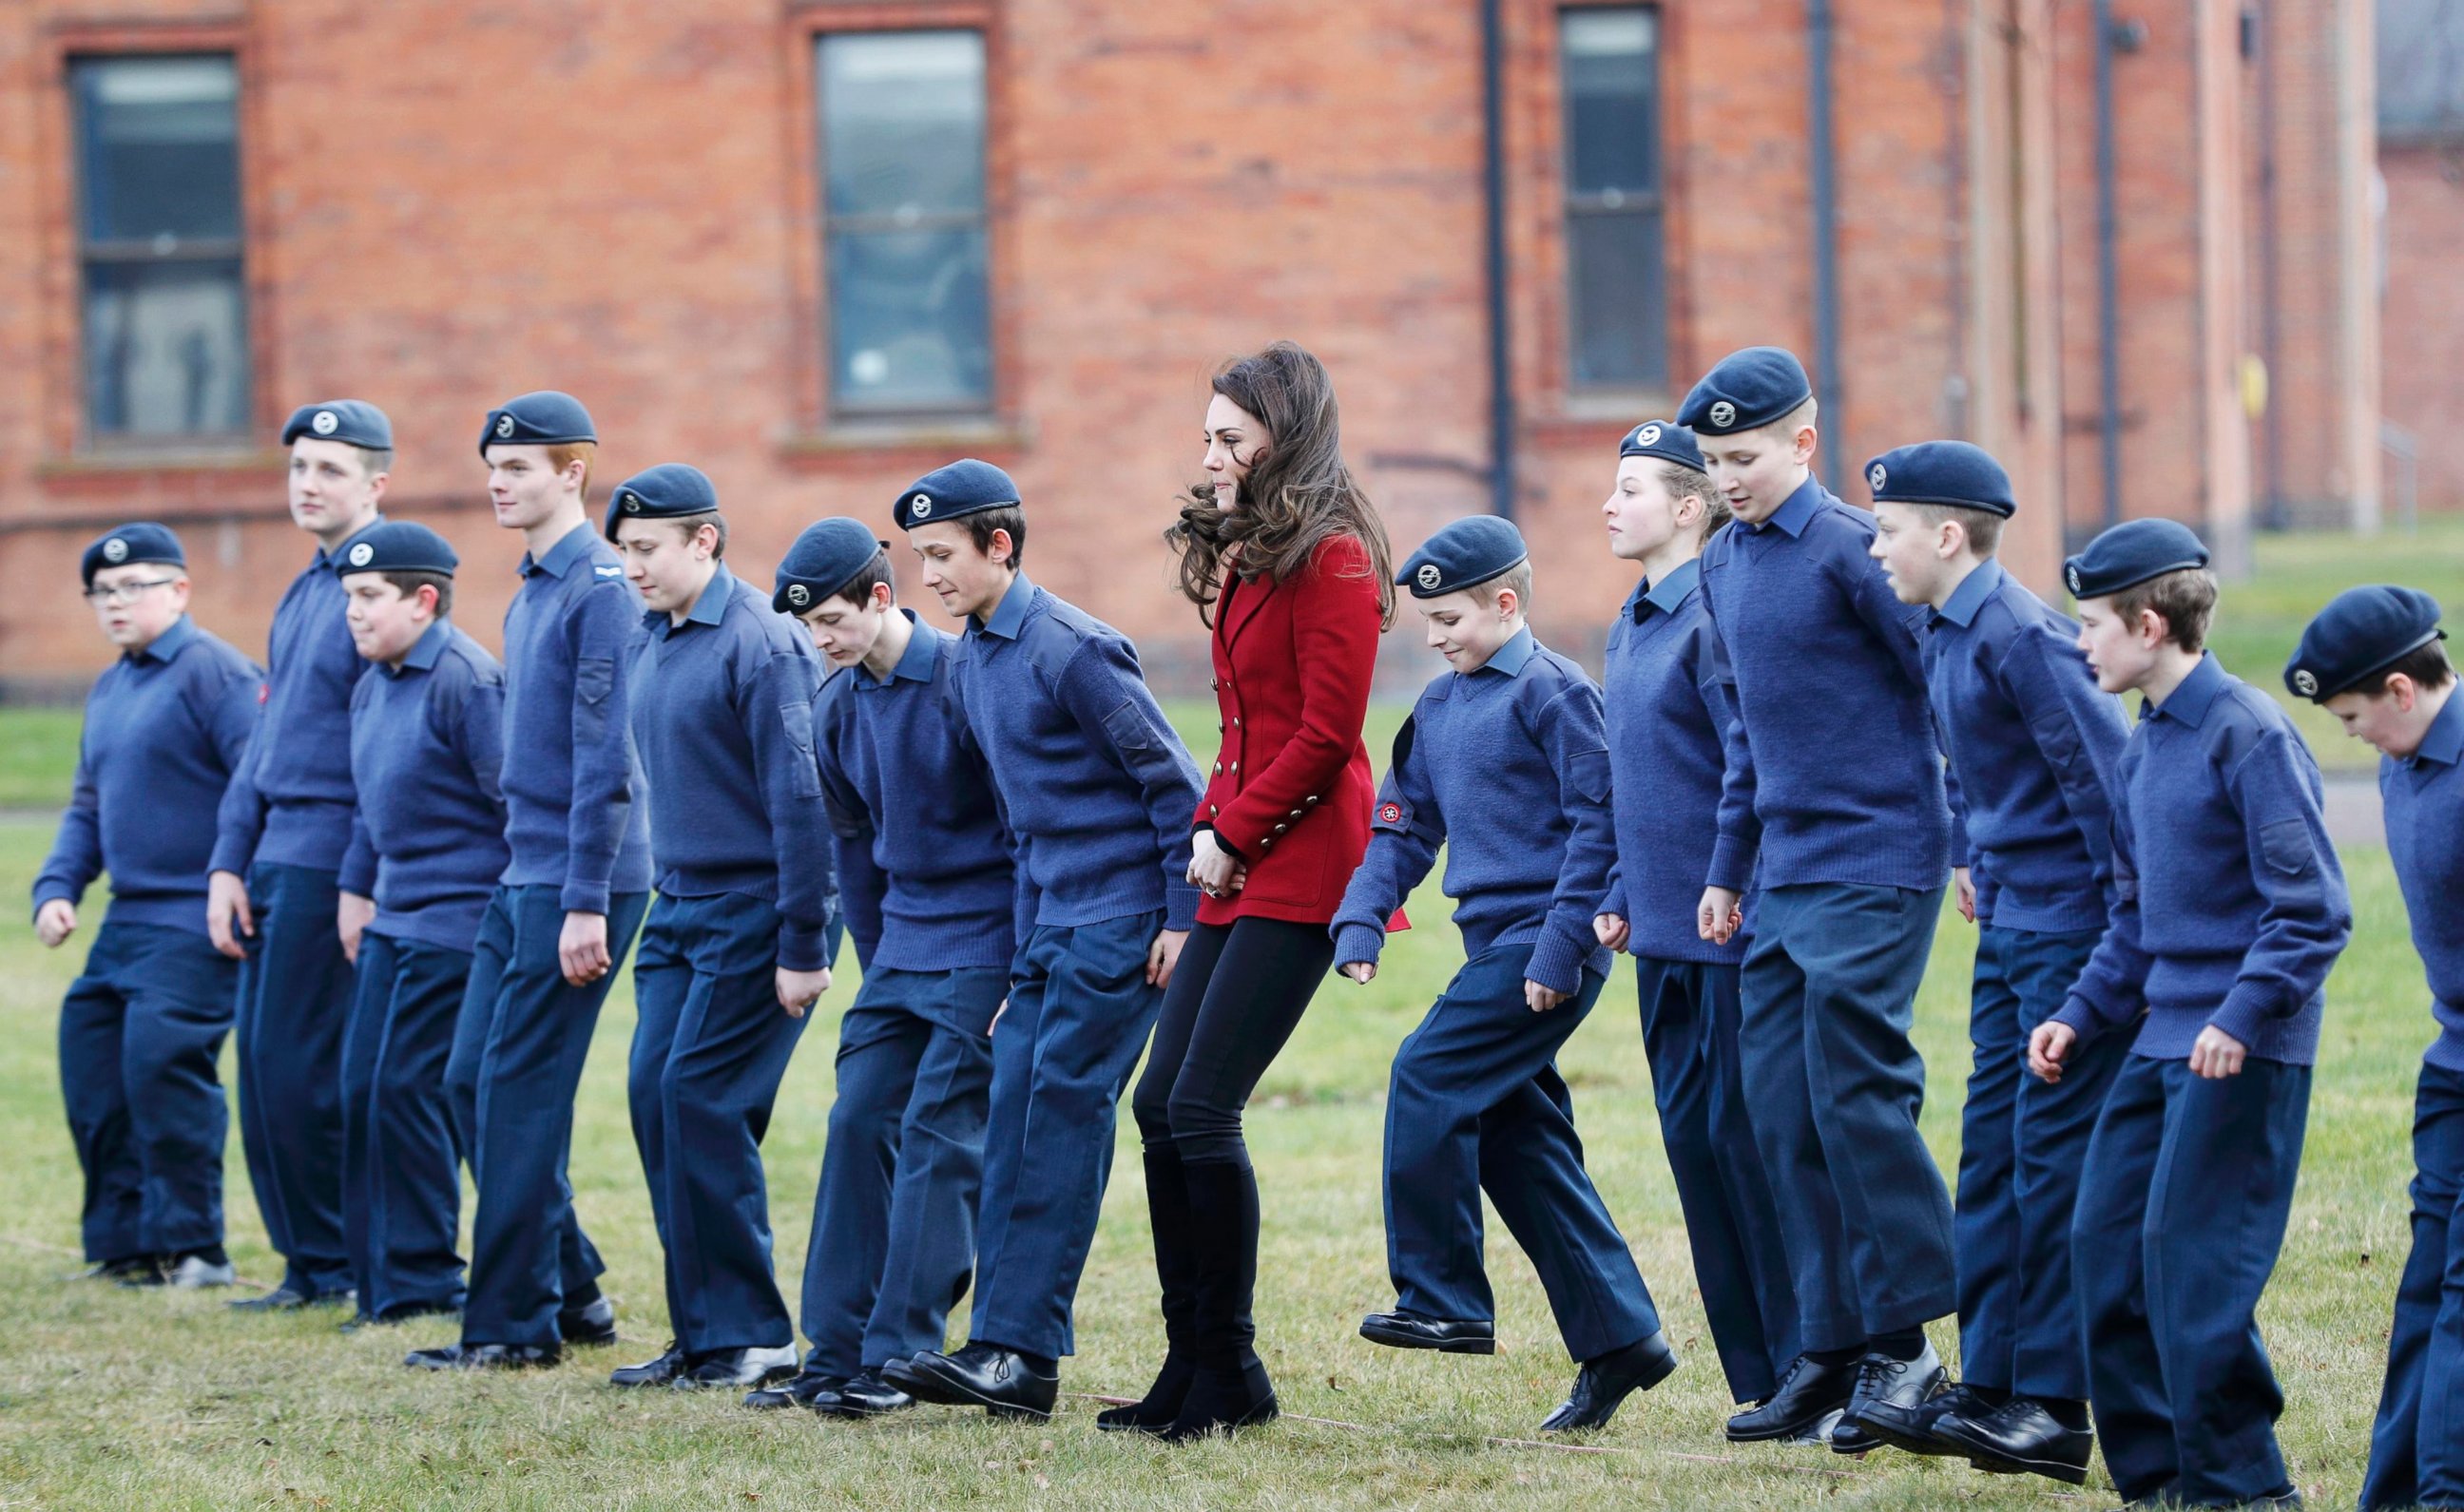 PHOTO: Britain's Catherine, the Duchess of Cambridge, takes part in a team building excercise with cadets during a visit to RAF Wittering, Feb. 14, 2017. 